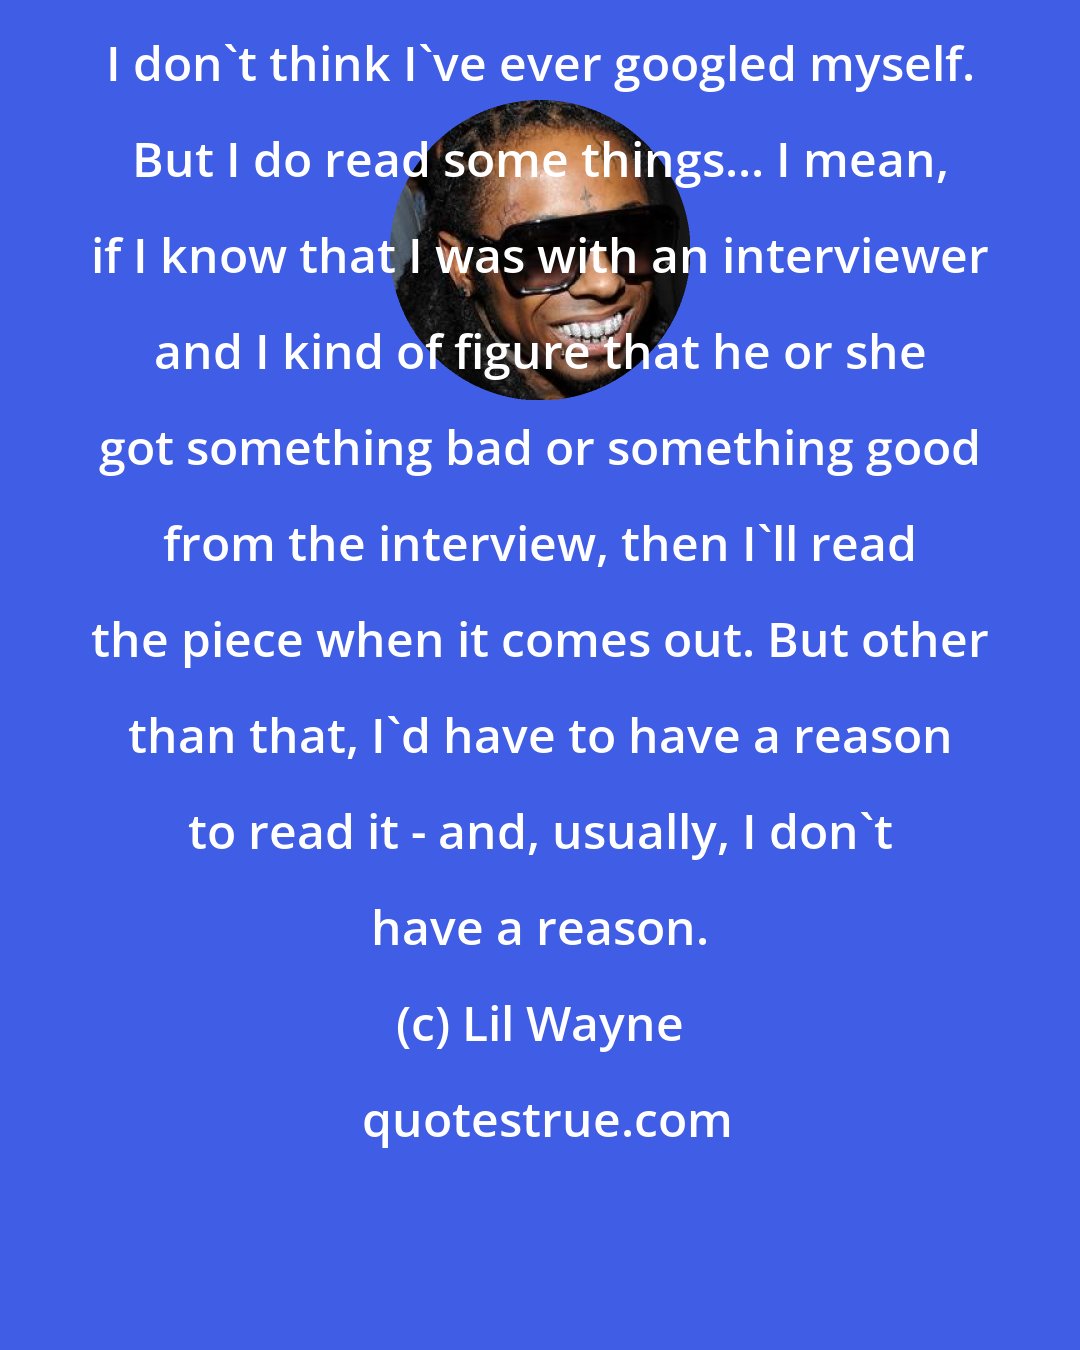 Lil Wayne: I don't think I've ever googled myself. But I do read some things... I mean, if I know that I was with an interviewer and I kind of figure that he or she got something bad or something good from the interview, then I'll read the piece when it comes out. But other than that, I'd have to have a reason to read it - and, usually, I don't have a reason.